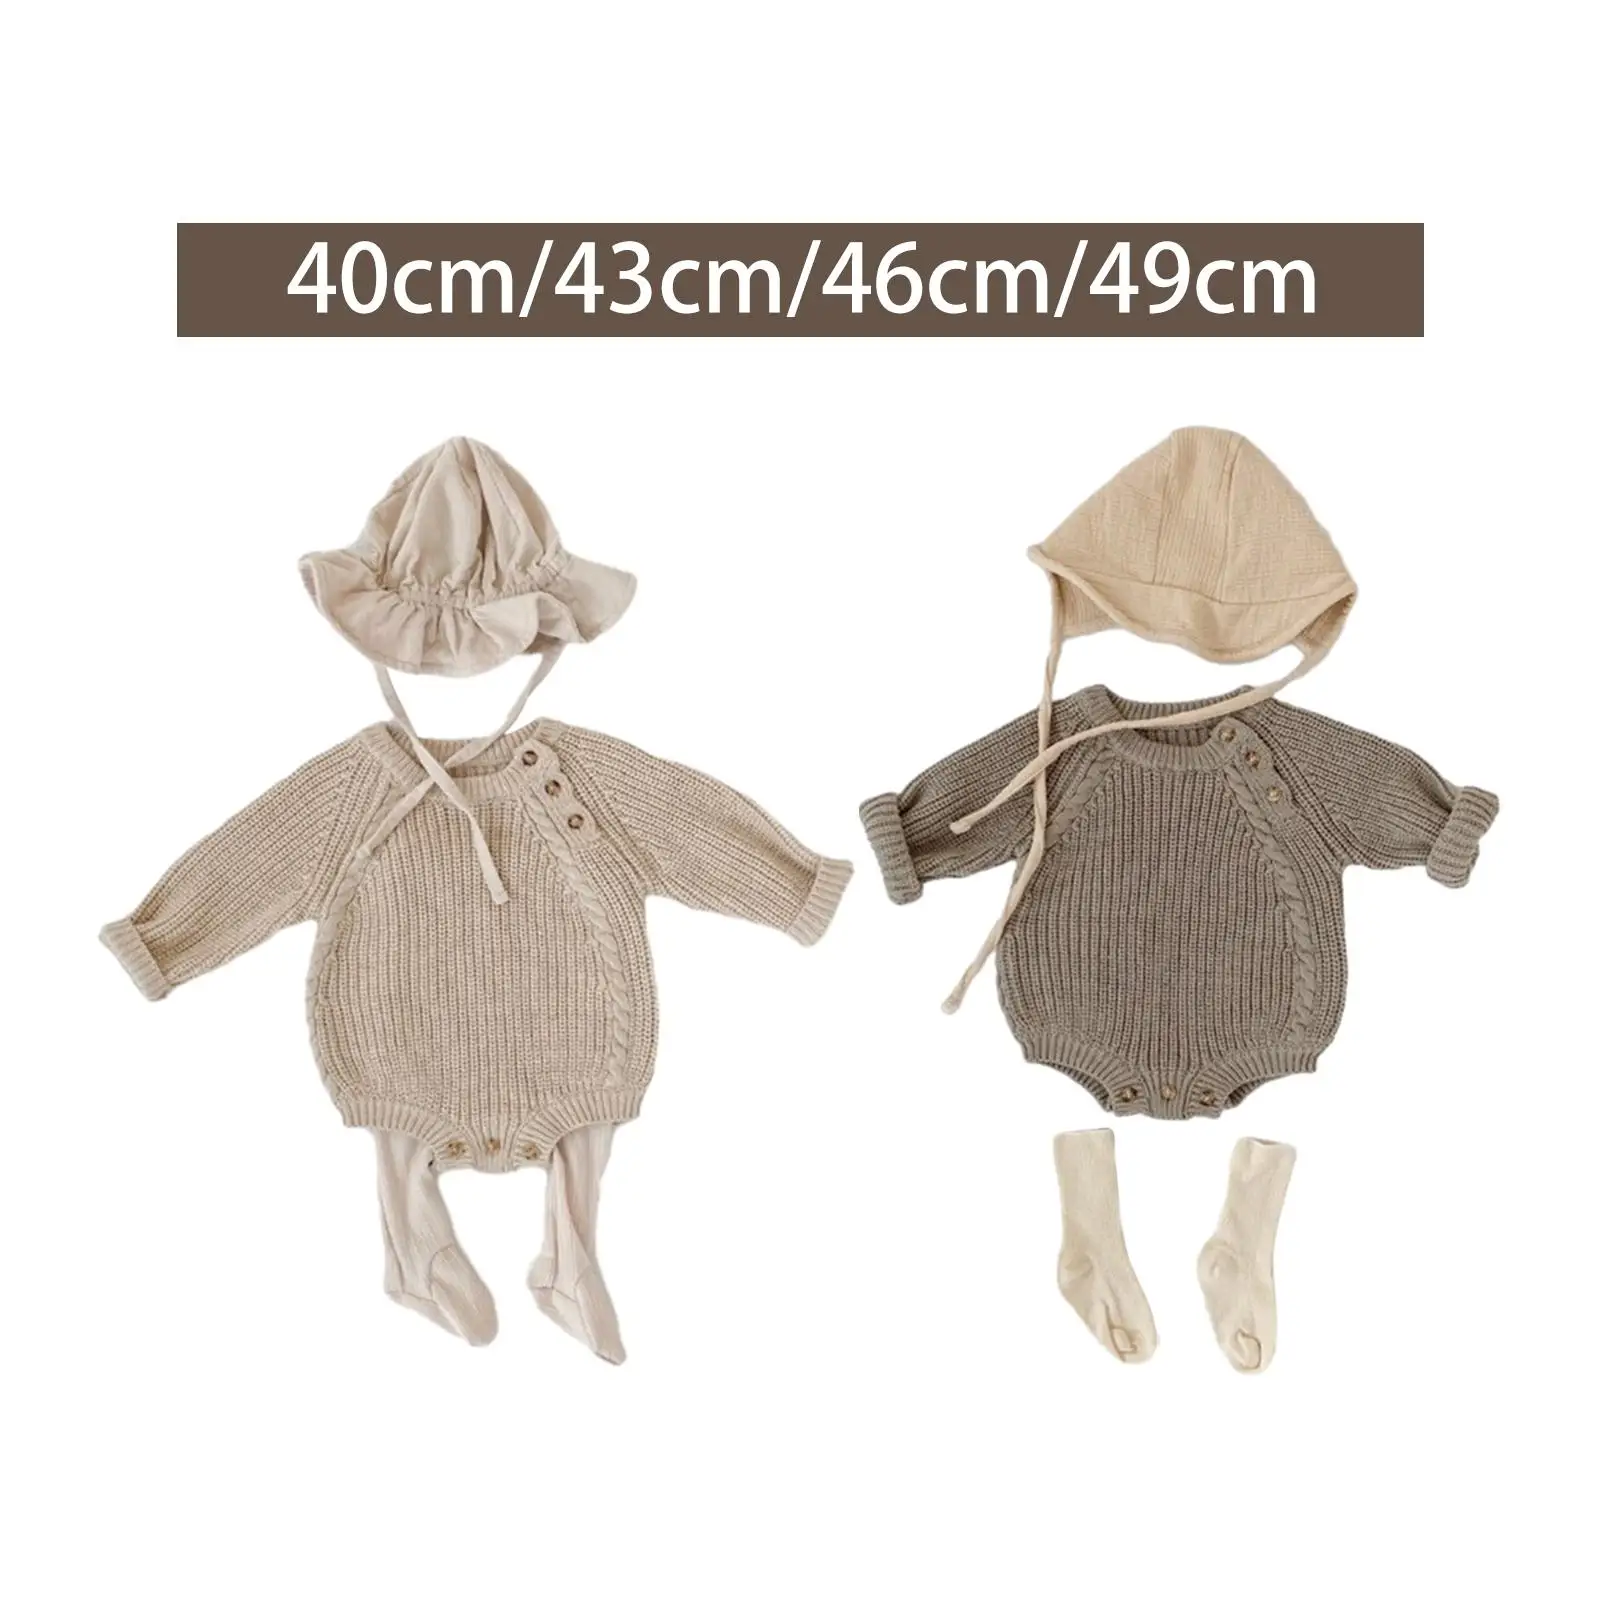 Kids Jumpsuit with Hat Socks Comfortable for Chinese New Year Autumn Outdoor 2